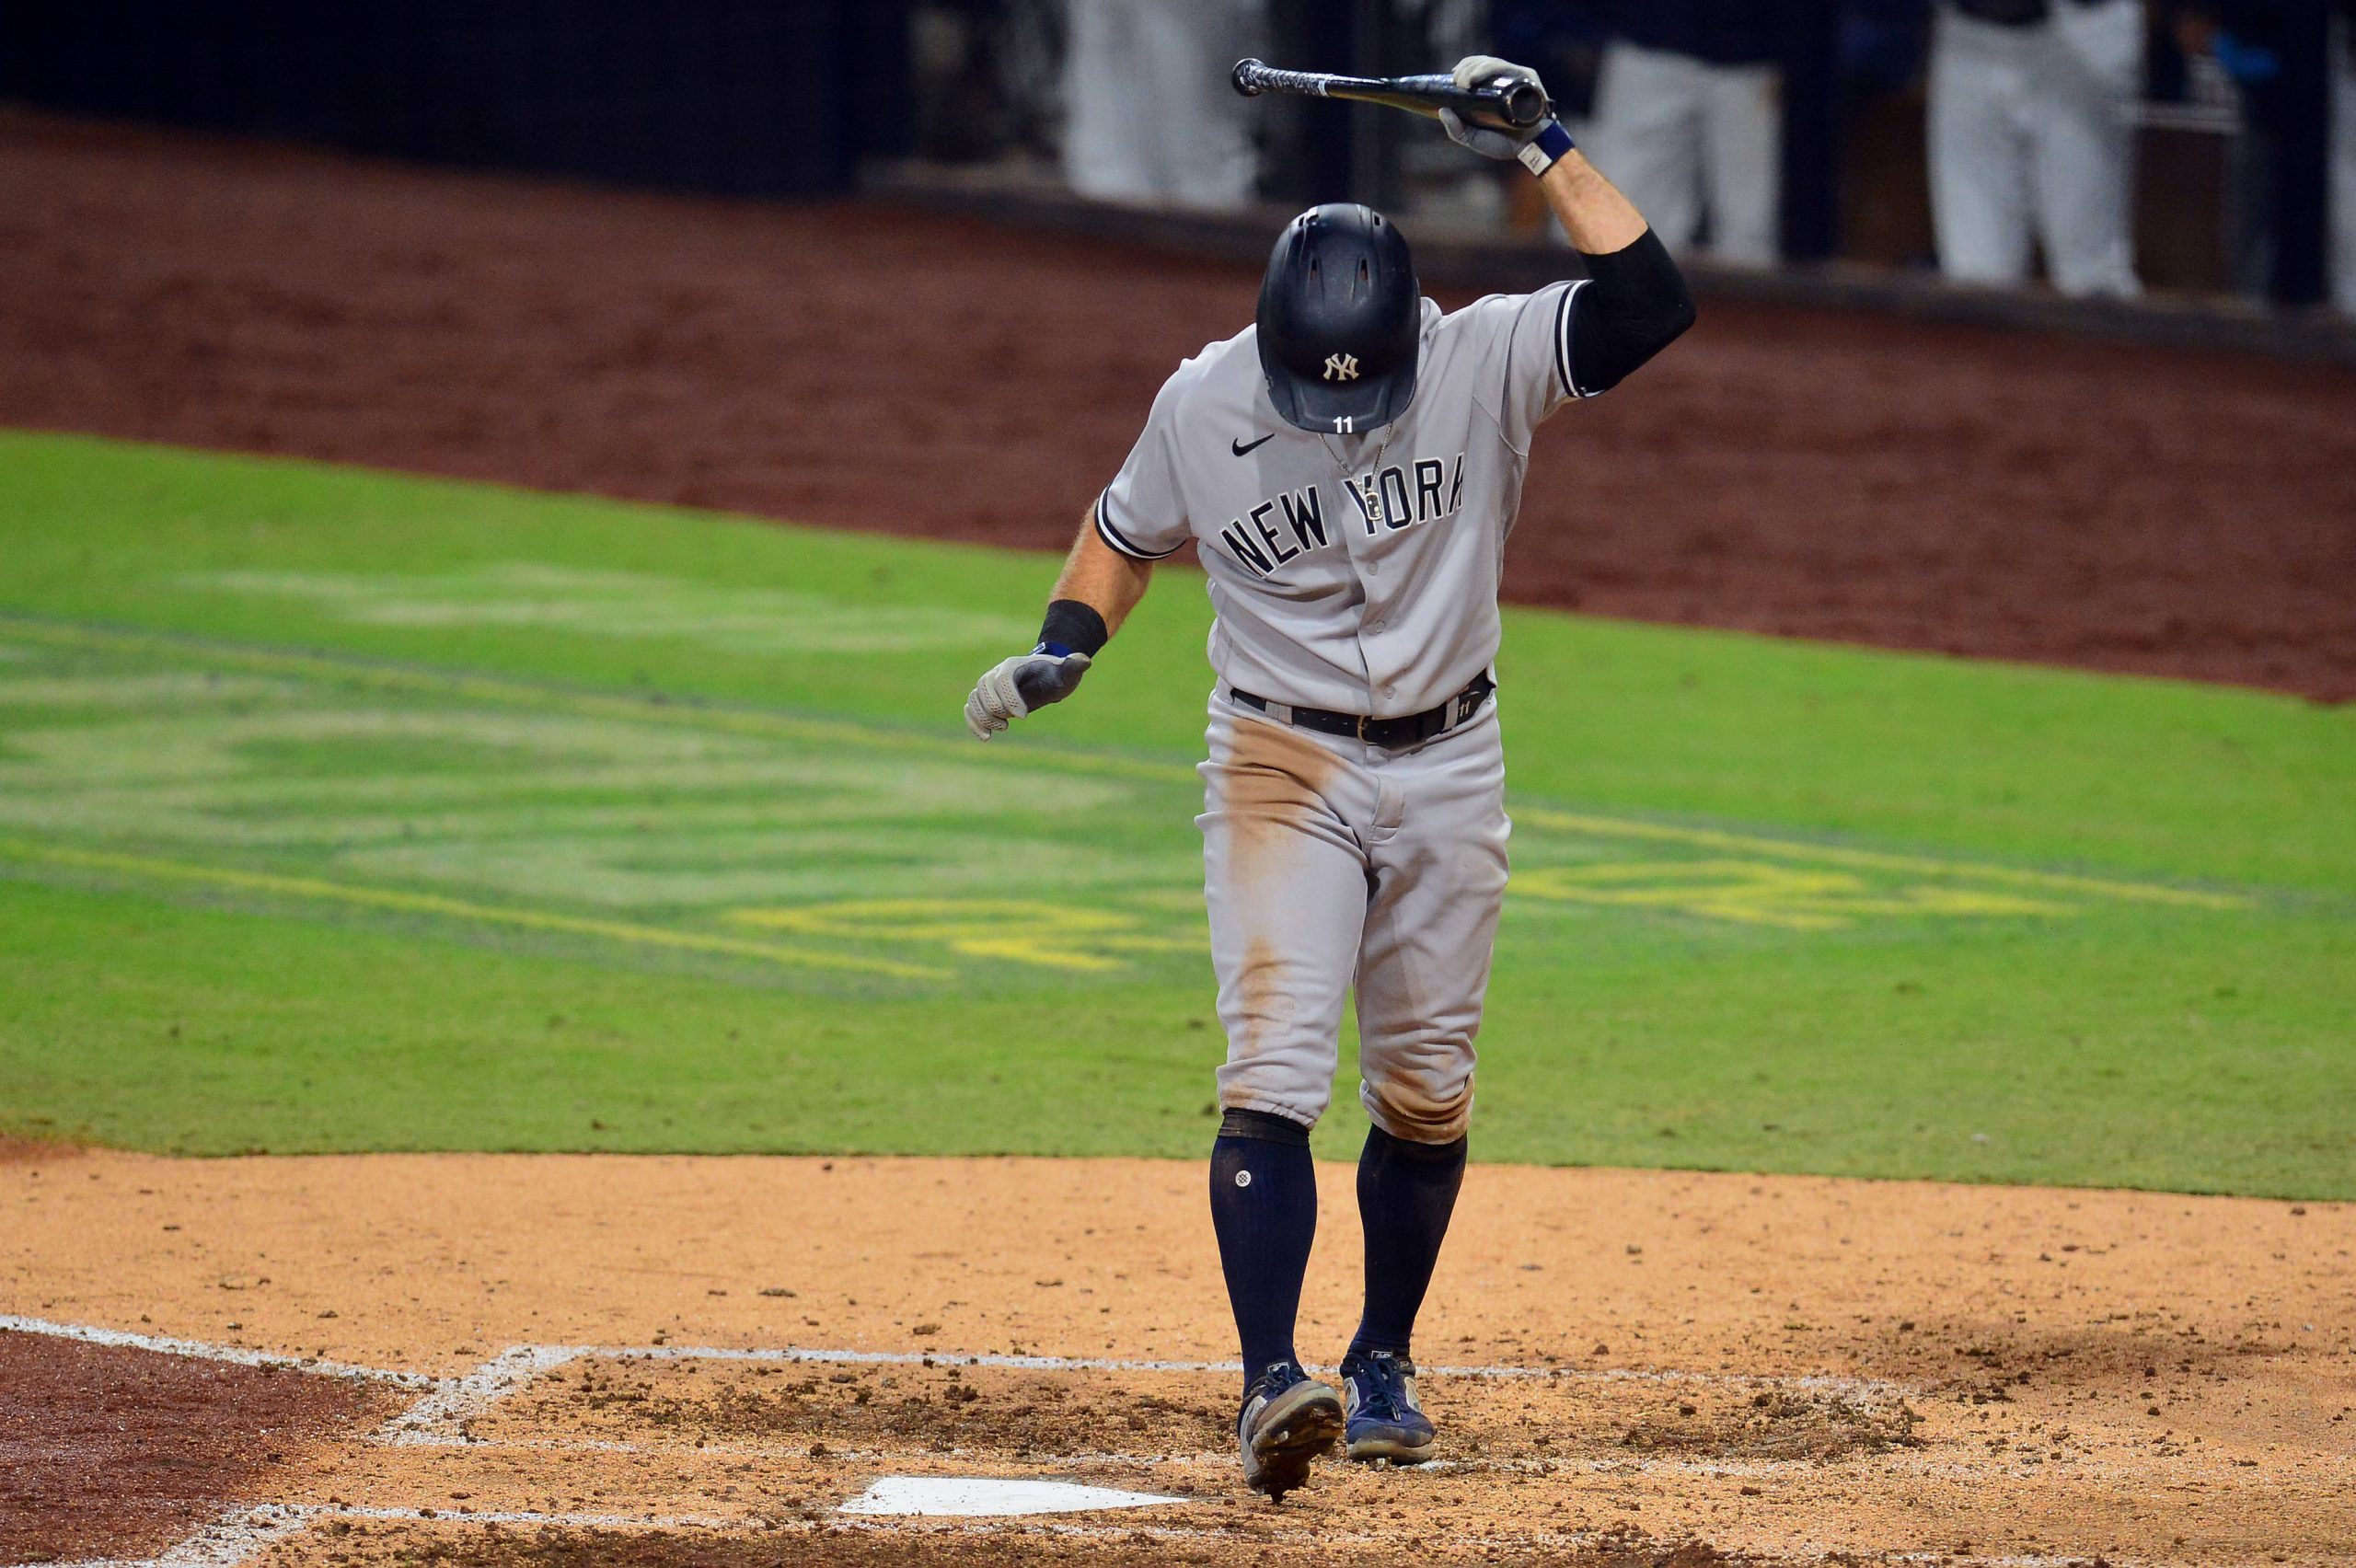 Yankees top Rays 5-1 to force ALDS Game 5 - Pinstripe Alley